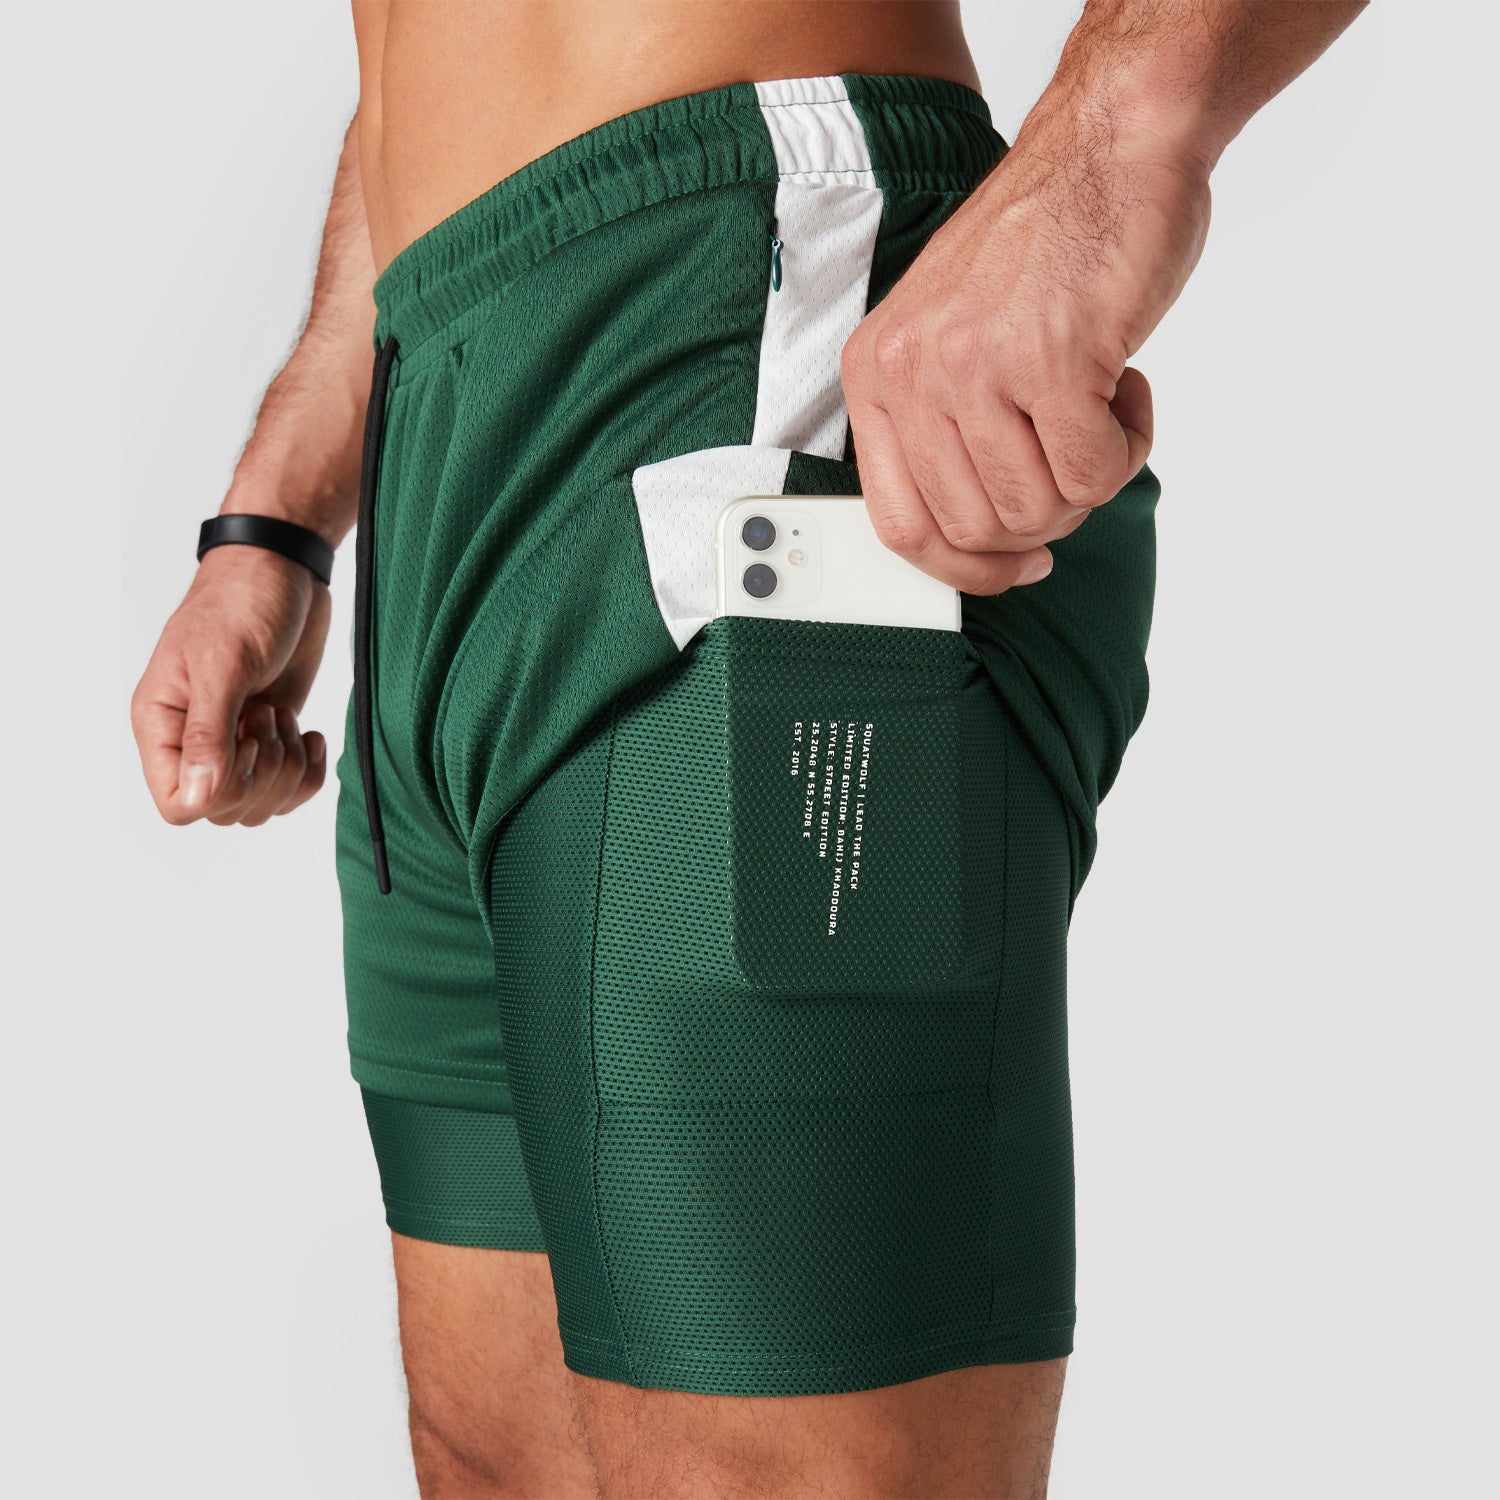 squatwolf-gym-wear-hybrid-performance-2-in-1-shorts-green-workout-shorts-for-men